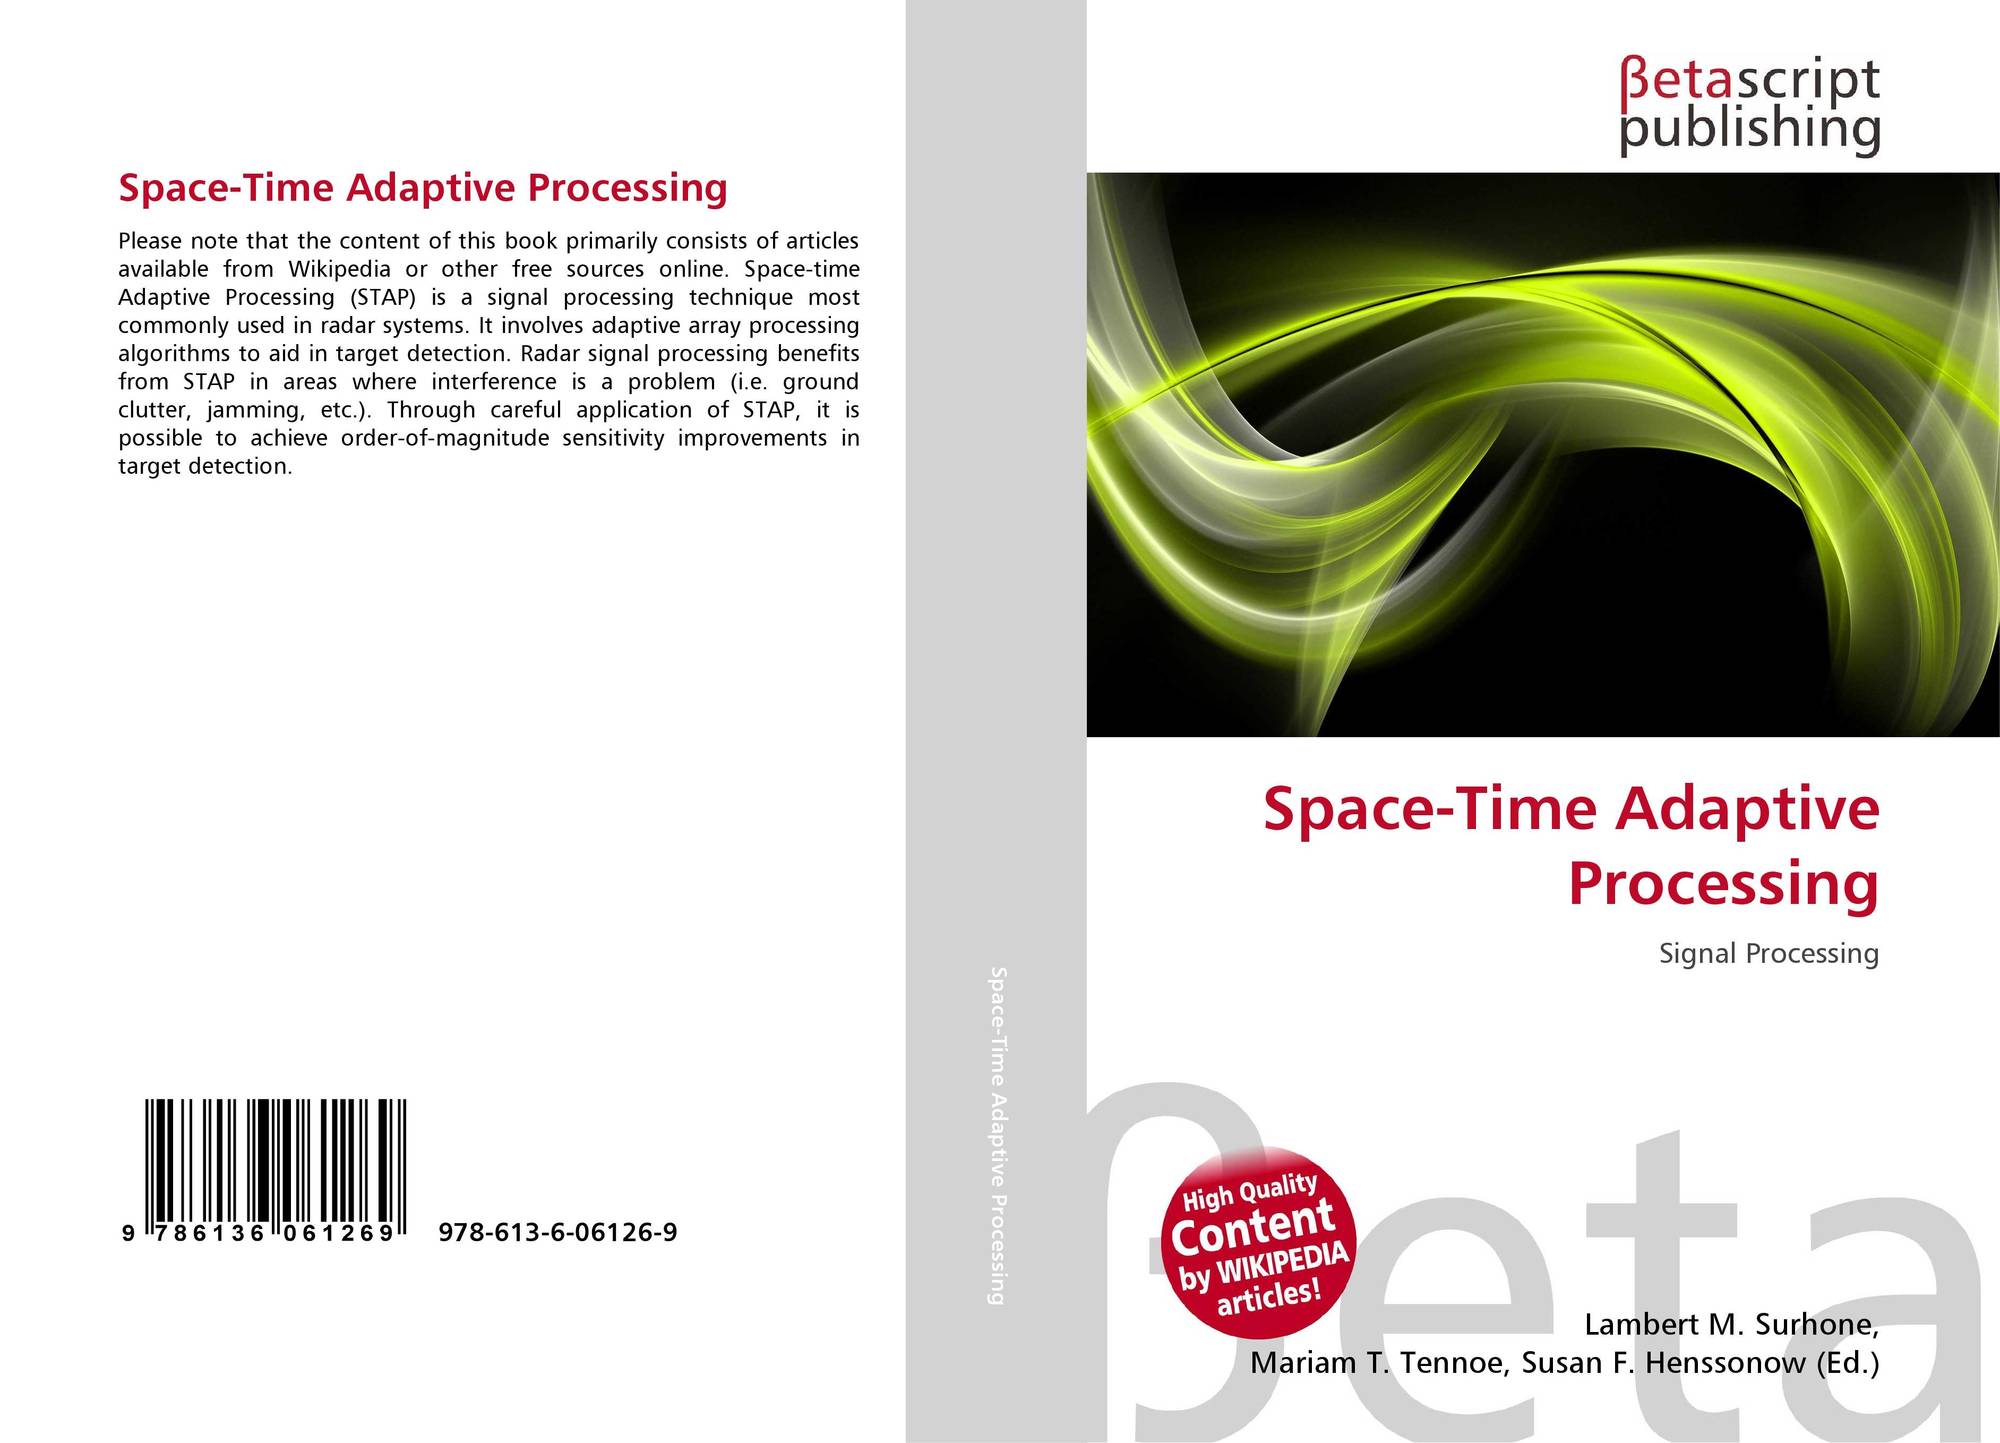 Space-time adaptive processing - Wikipedia